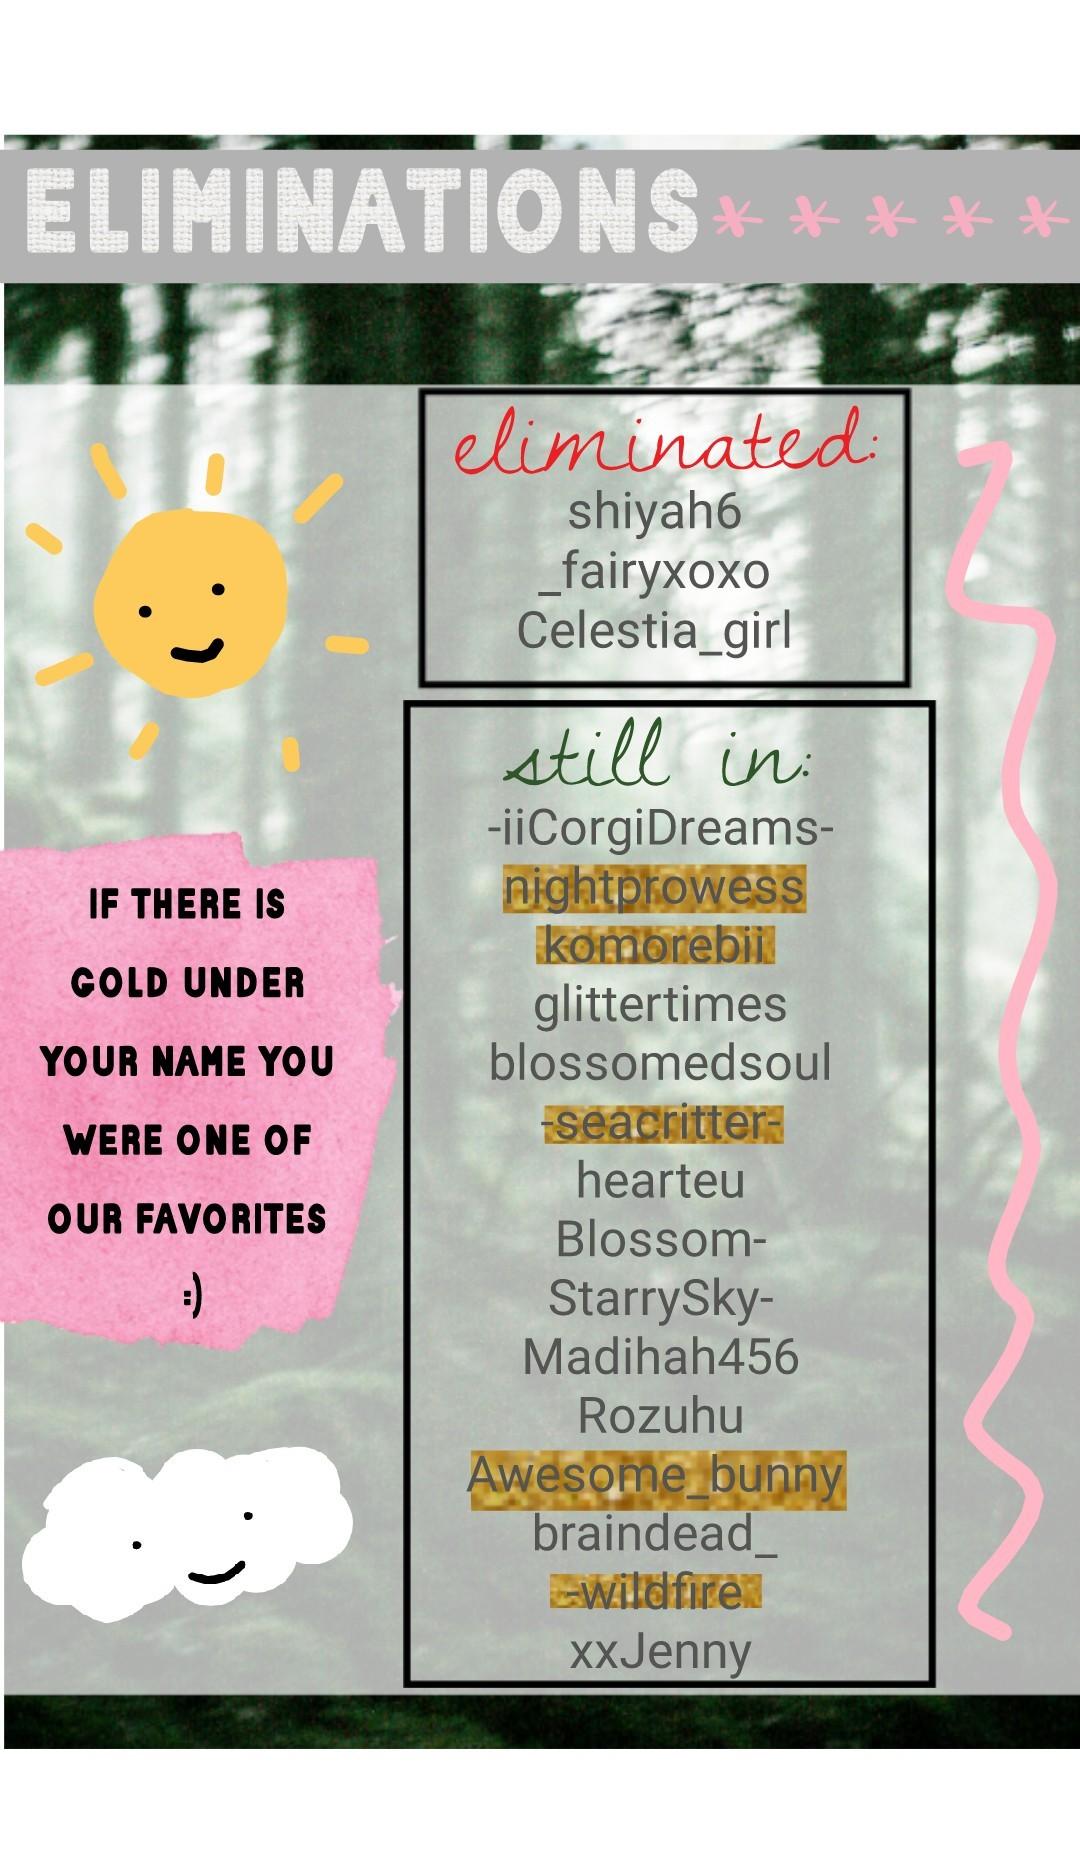 we're sorry if you got eliminated 😔 if you think im a terrible person and i shouldnt have eliminated you message me and we'll chat 😂
-yours truly 